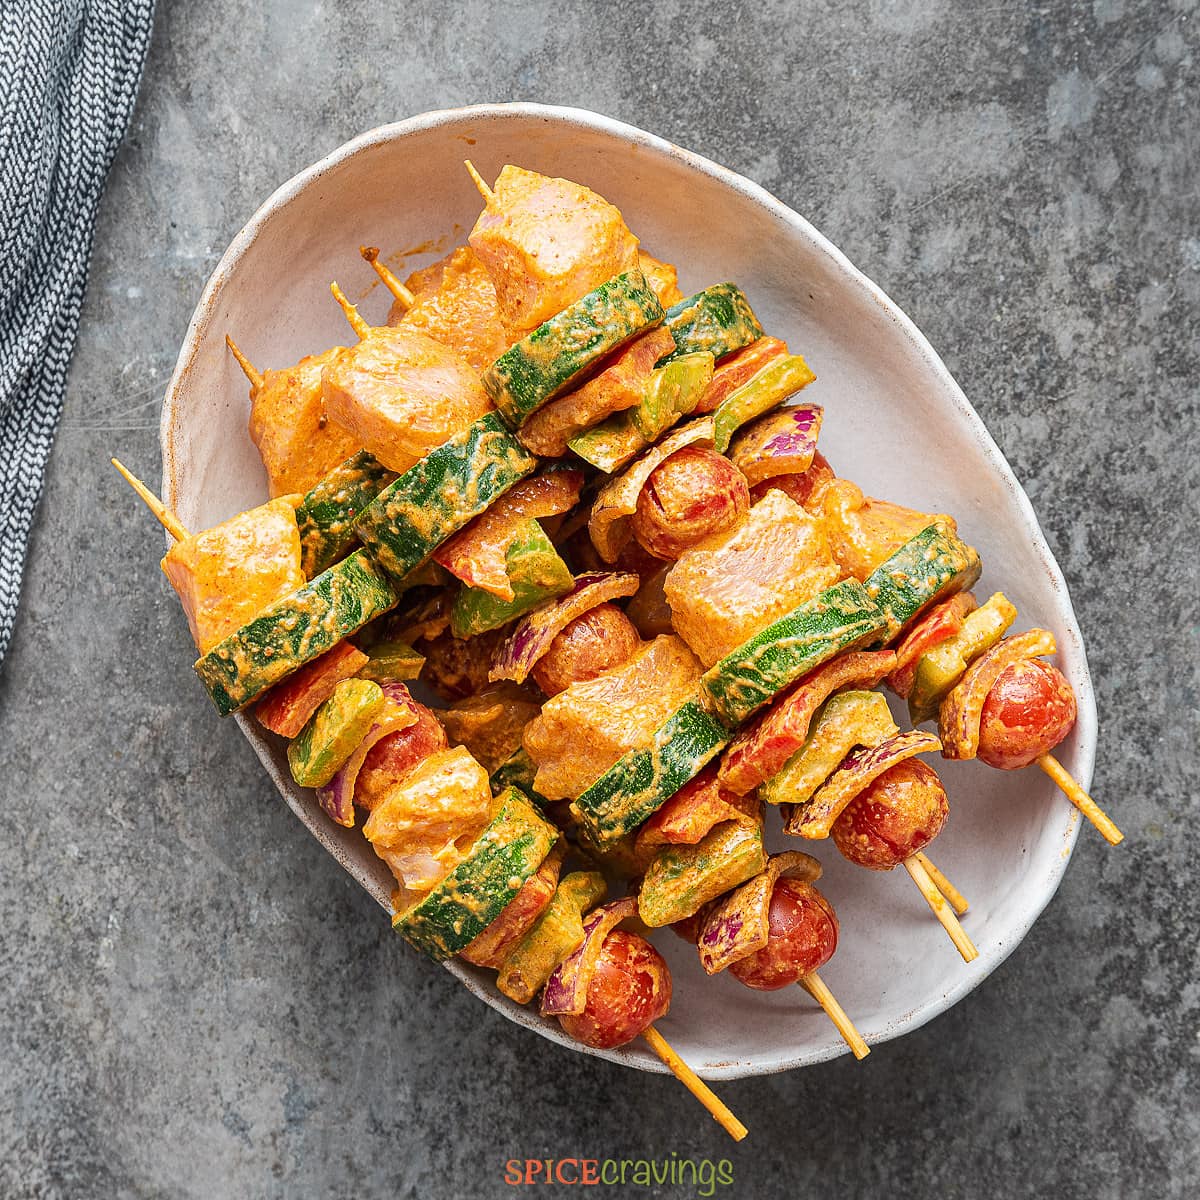 skewers of chicken and vegetables assembled on white plate